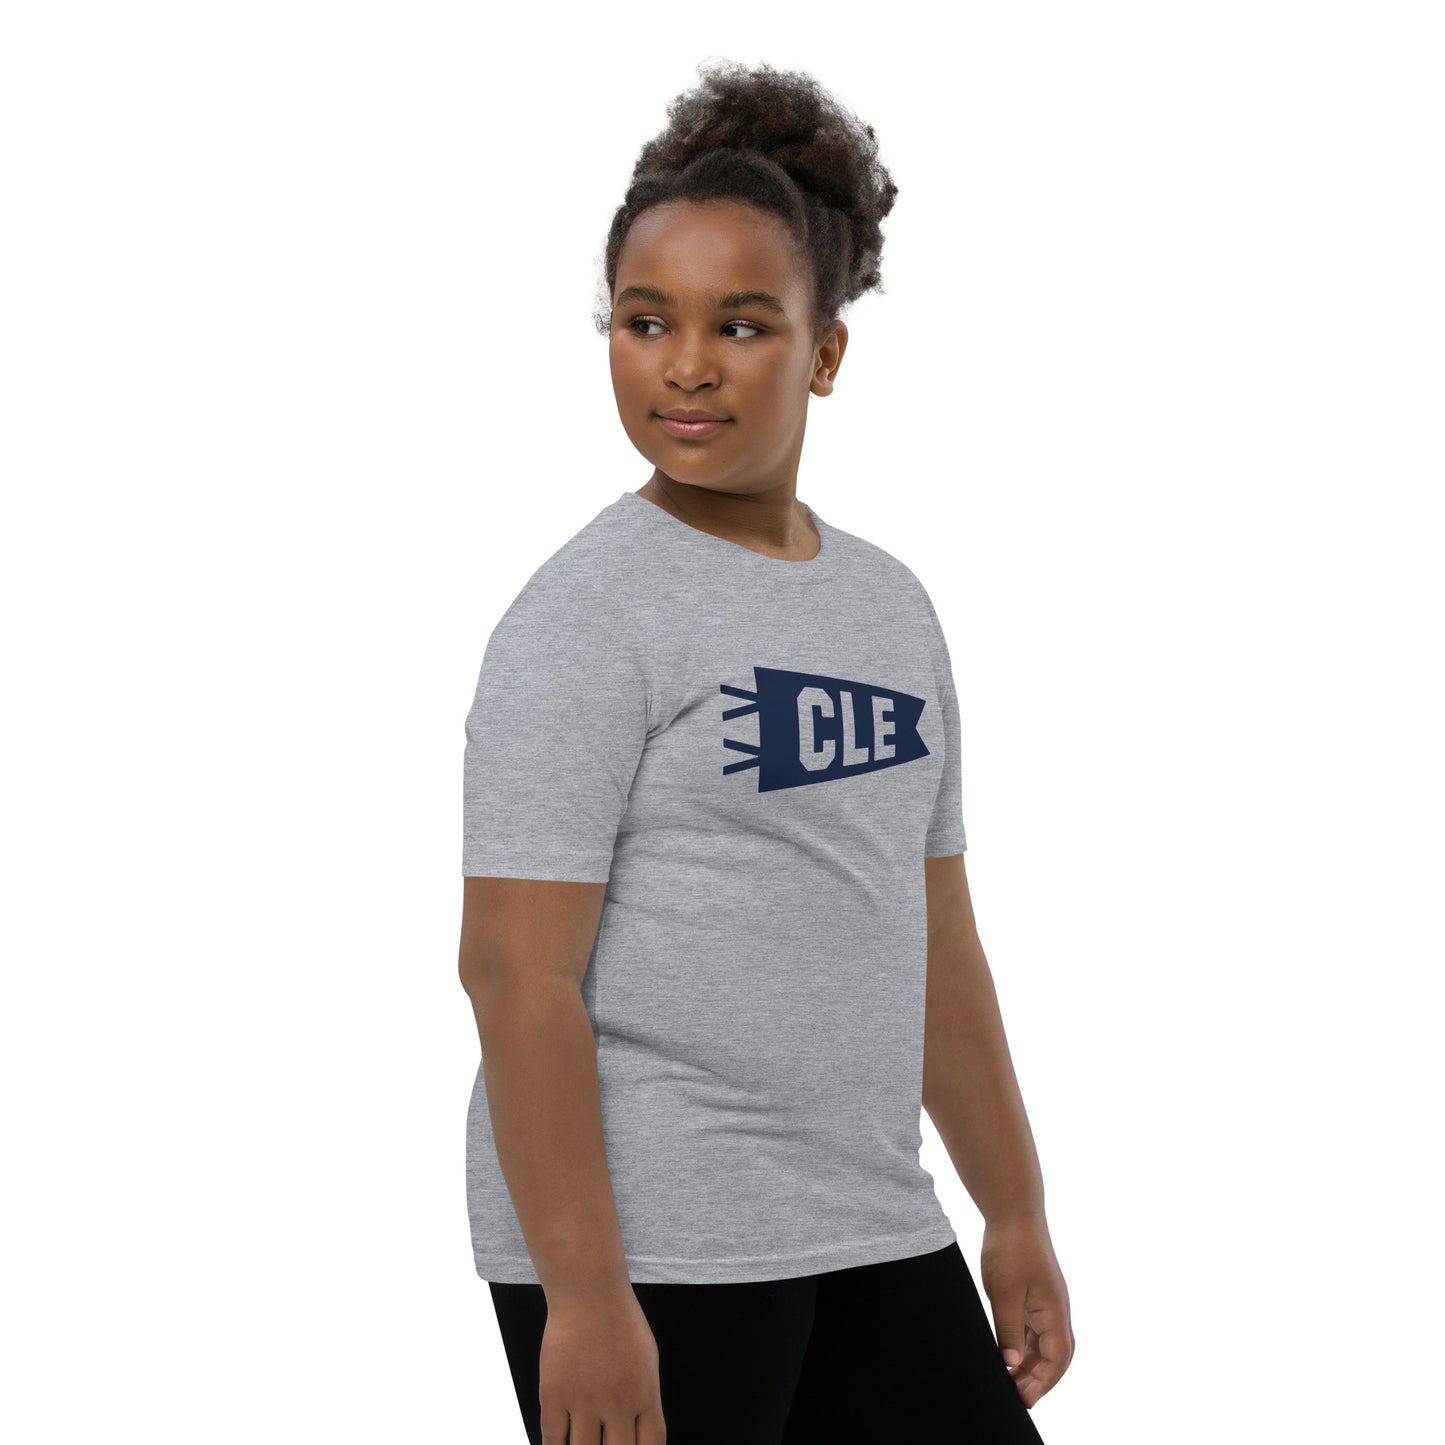 Kid's Airport Code Tee - Navy Blue Graphic • CLE Cleveland • YHM Designs - Image 03